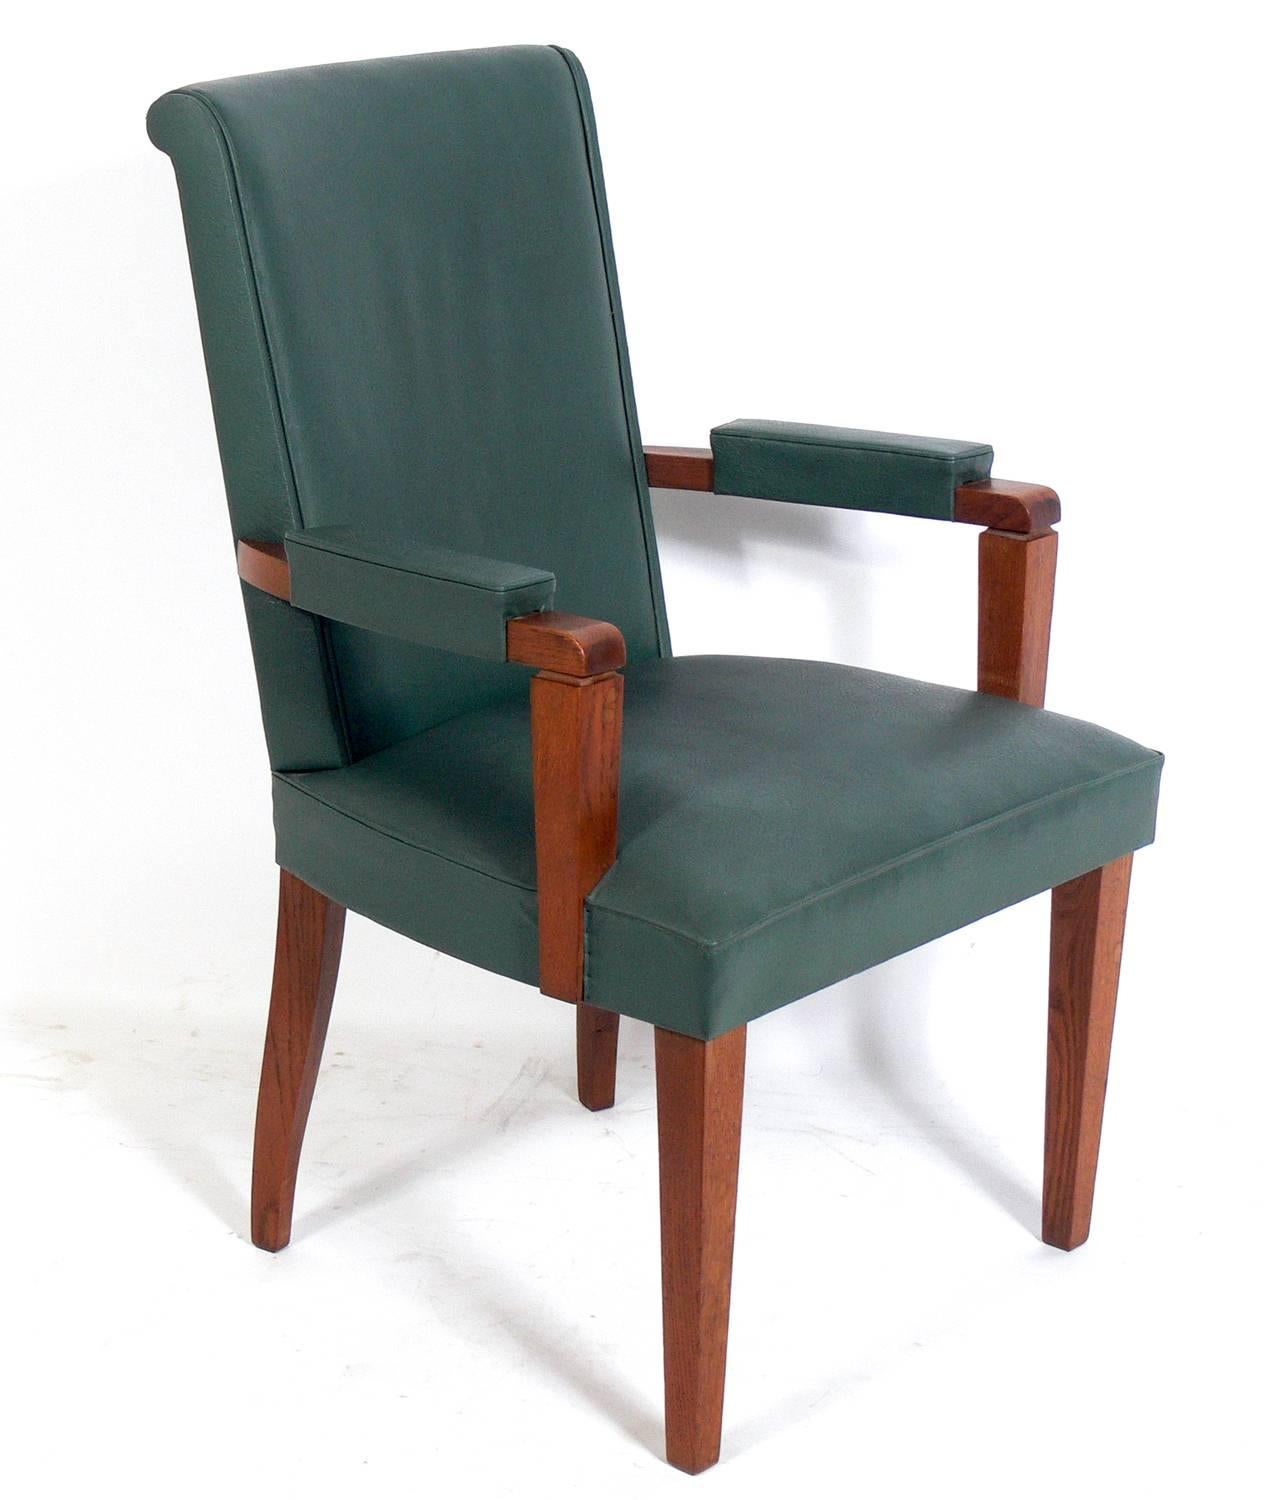 Set of Six French Art Deco oak dining chairs, in the manner of Andre Arbus, French, circa 1940s. These chairs are currently being reupholstered, as one chair has significant wear to it's upholstery. The priced noted below includes reupholstery in